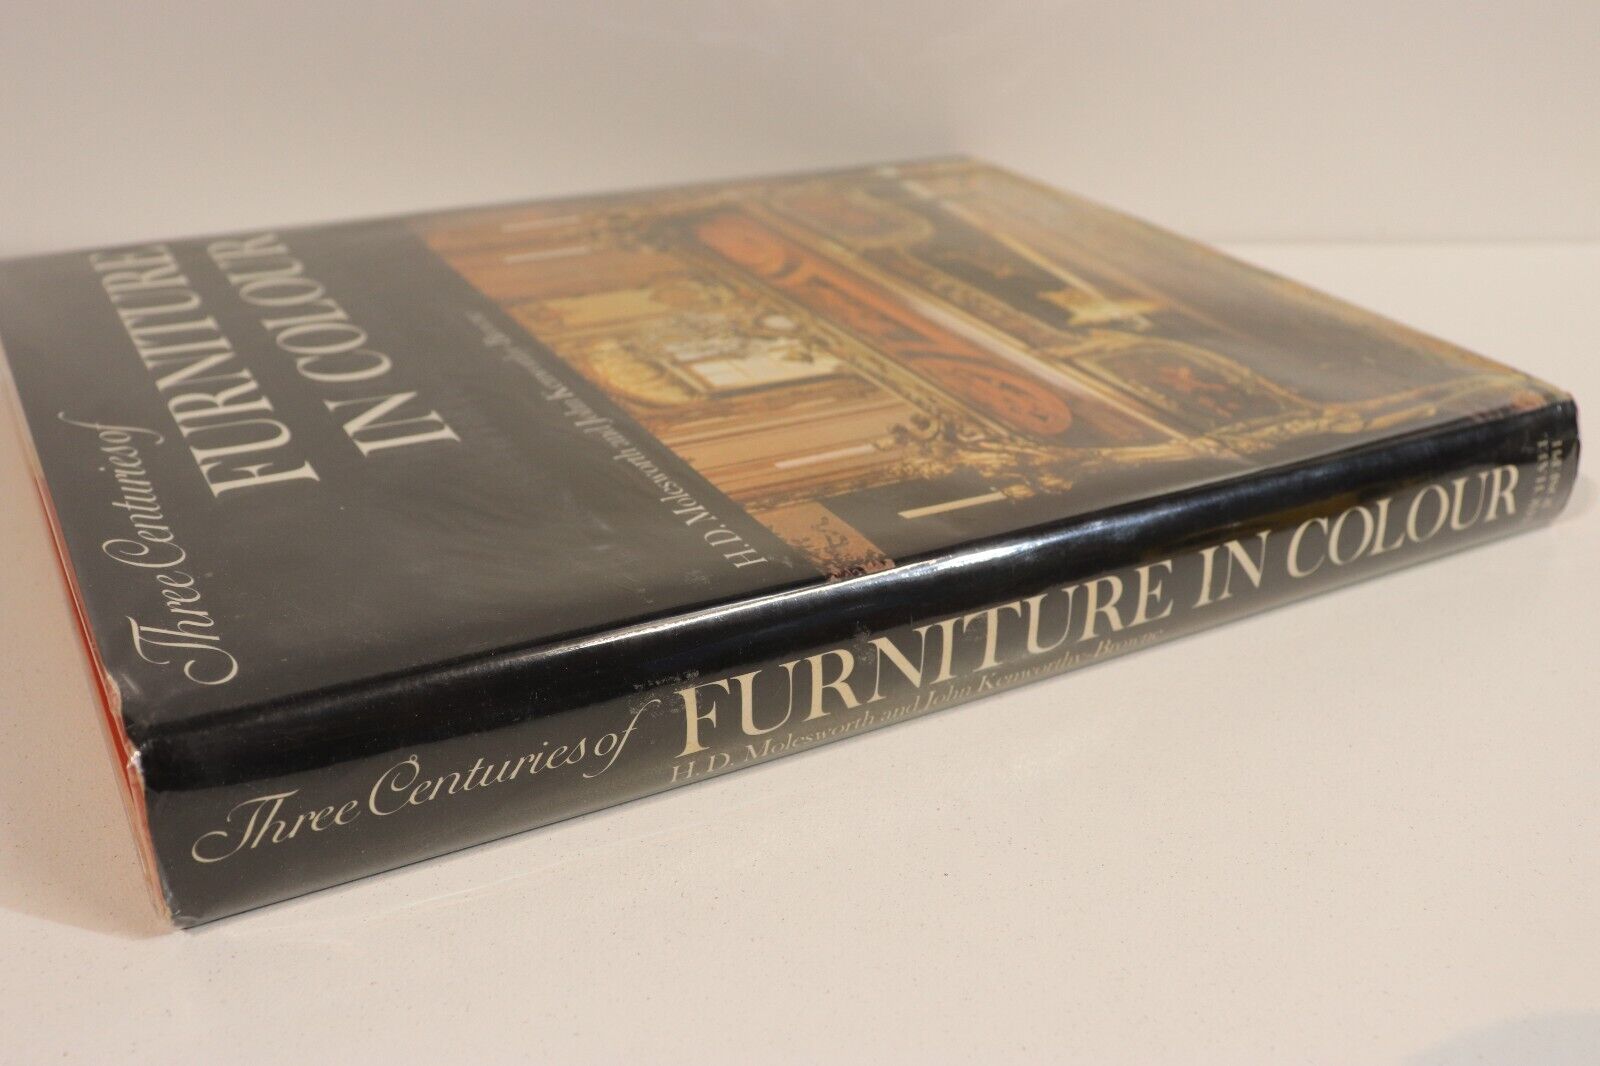 Three Centuries Of Furniture - 1972 - Antique Furniture Reference Book - 0